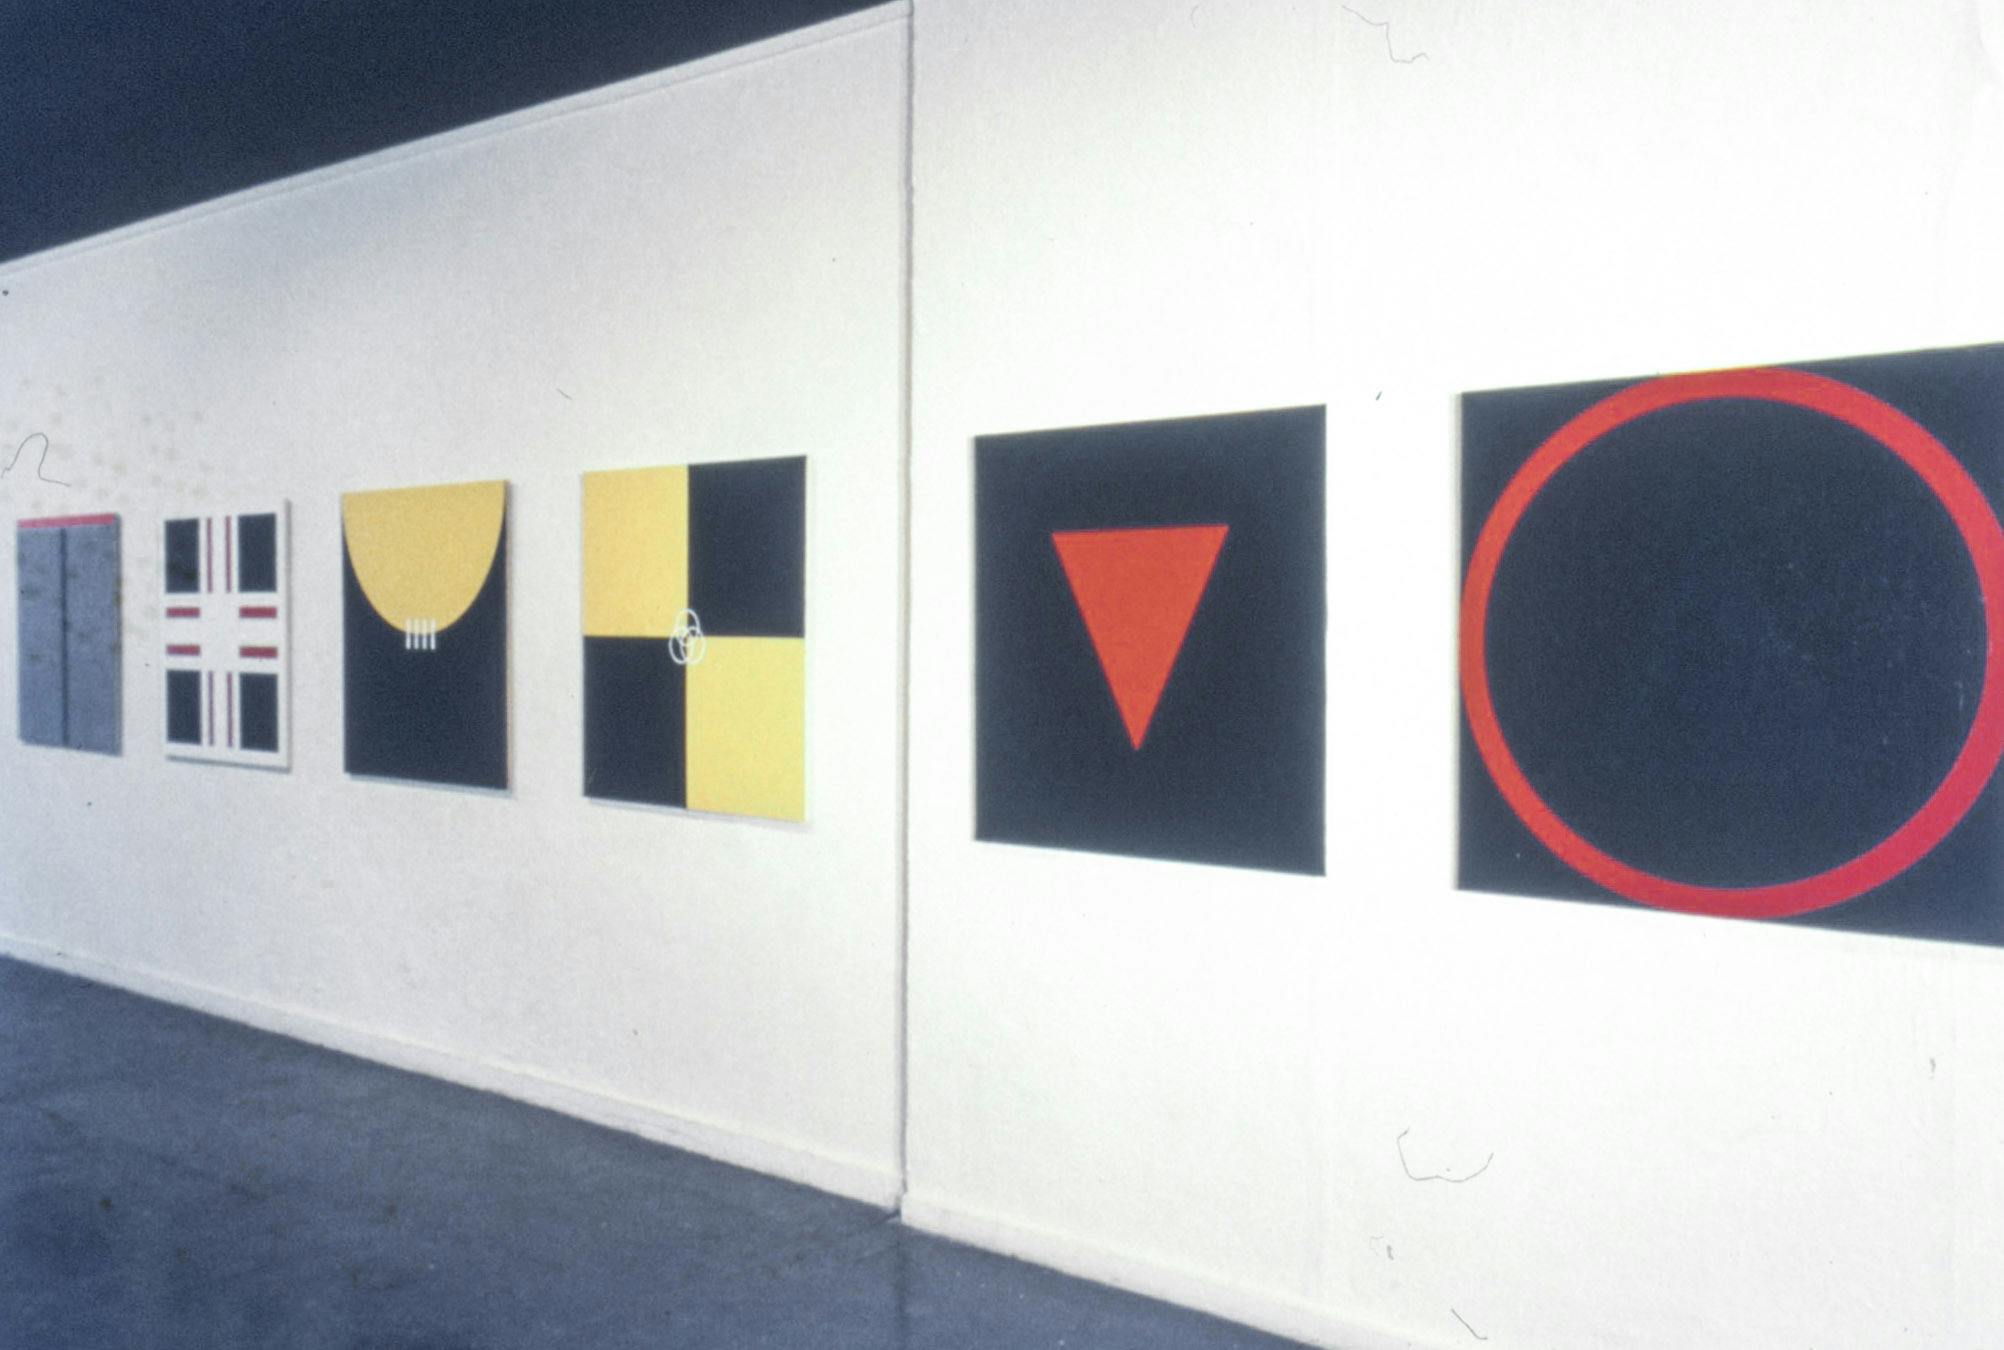 Six large paintings on a wall. They are all on square canvases and show different geometric shapes including circles, squares, triangles, and crosses. They are red, black, white, grey, and yellow.